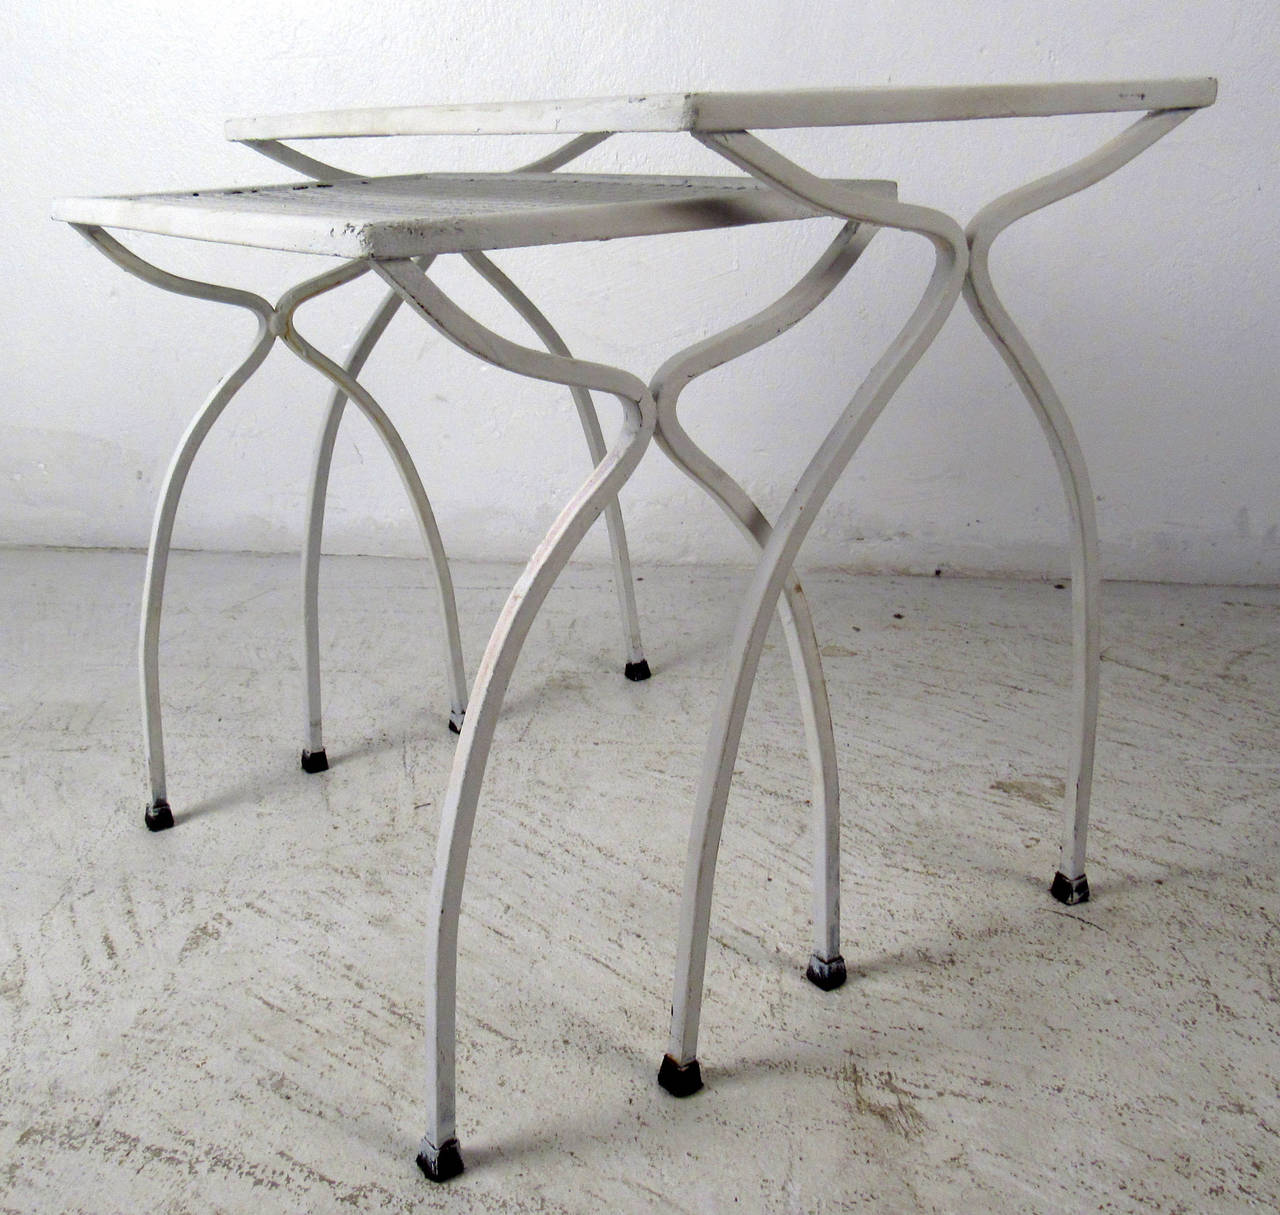 Vintage-modern set of industrial style nesting tables, features bent iron legs and mesh top, perfect for outdoor use.

Smaller table dimensions - 16.5W 10.5D 16.5H

Please confirm item location NY or NJ with dealer.